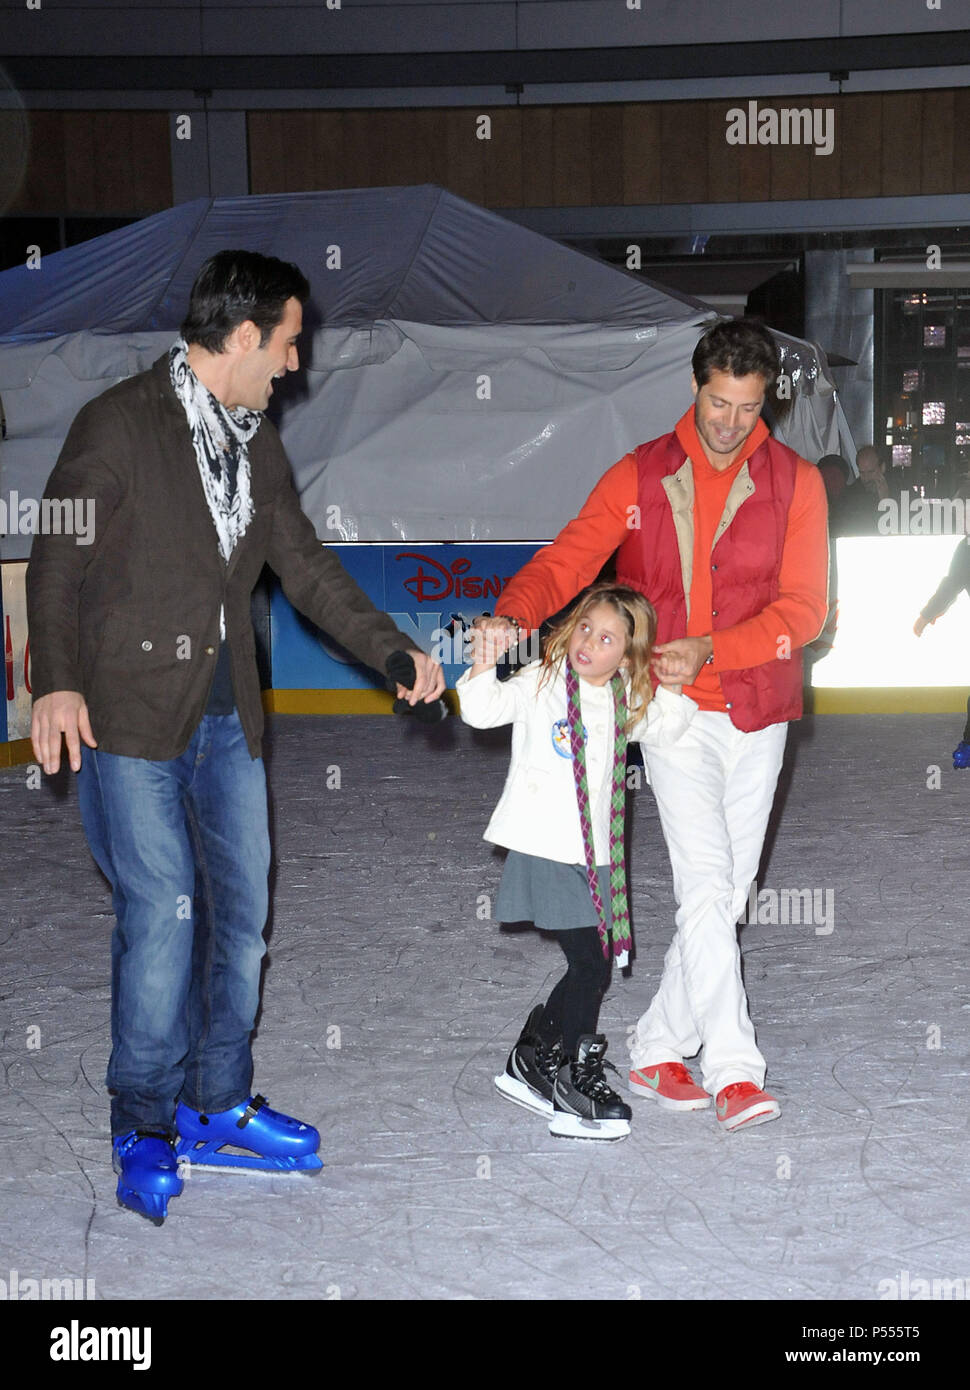 Gilles Marini, David Charvet, daughter  at Toy Story 3 On Ice To benefit the Children Hospital at the Nokia Ice Skating in Los Angeles.Gilles Marini, David Charvet, daughter  ------------- Red Carpet Event, Vertical, USA, Film Industry, Celebrities,  Photography, Bestof, Arts Culture and Entertainment, Topix Celebrities fashion /  Vertical, Best of, Event in Hollywood Life - California,  Red Carpet and backstage, USA, Film Industry, Celebrities,  movie celebrities, TV celebrities, Music celebrities, Photography, Bestof, Arts Culture and Entertainment,  Topix, vertical,  family from from the ye Stock Photo